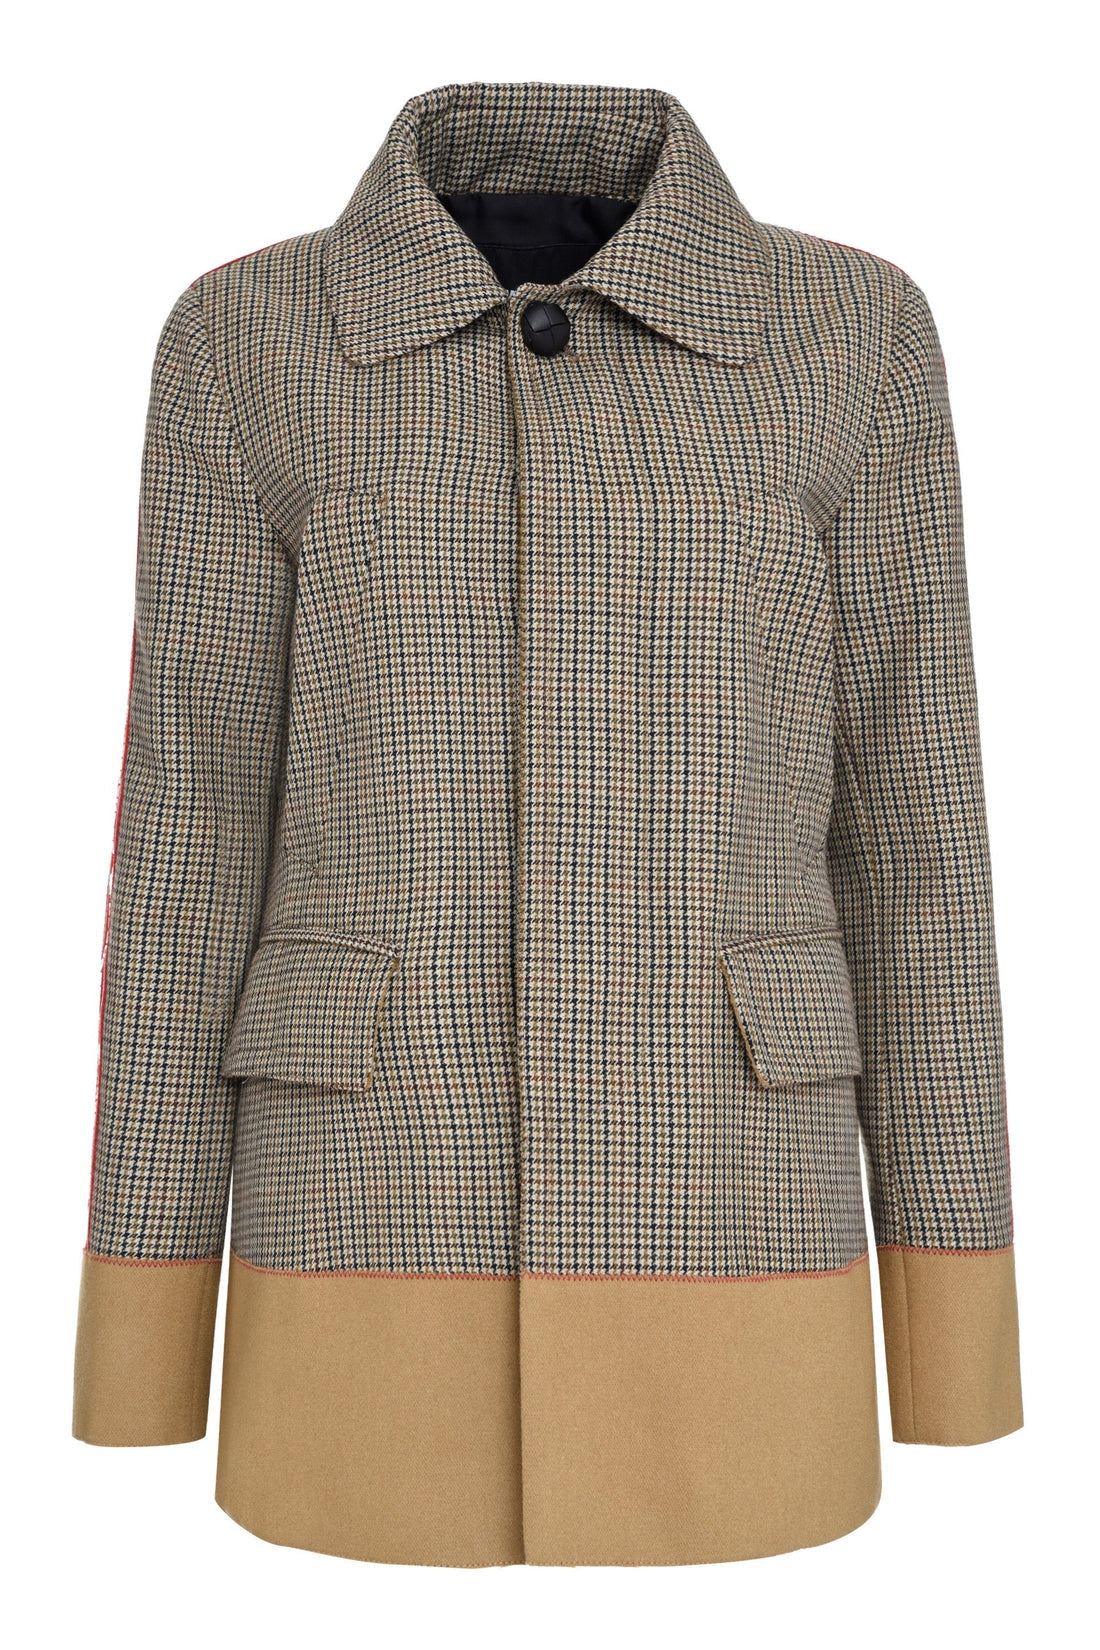 Dsquared2-OUTLET-SALE-Checked wool jacket-ARCHIVIST